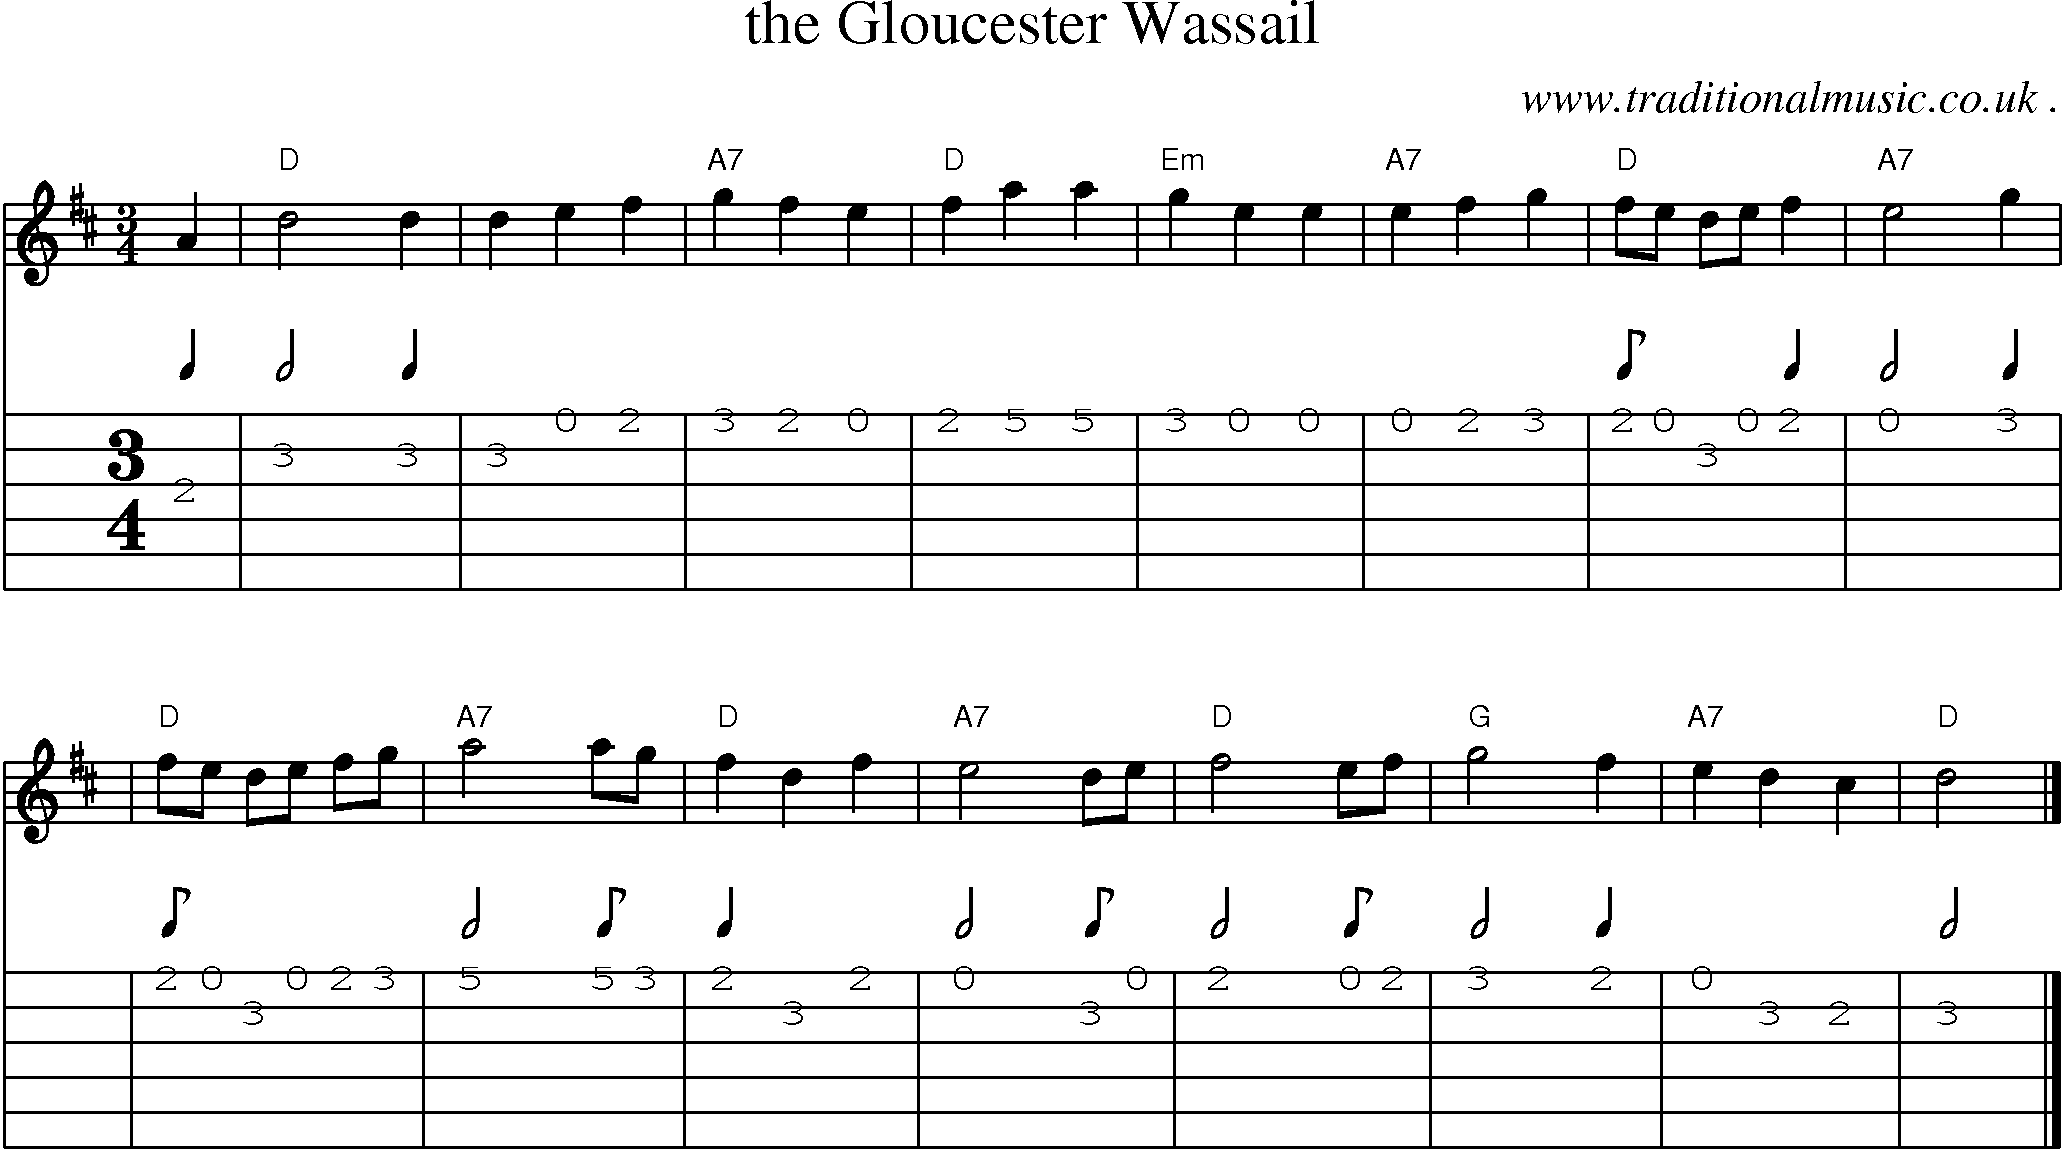 Sheet-music  score, Chords and Guitar Tabs for The Gloucester Wassail